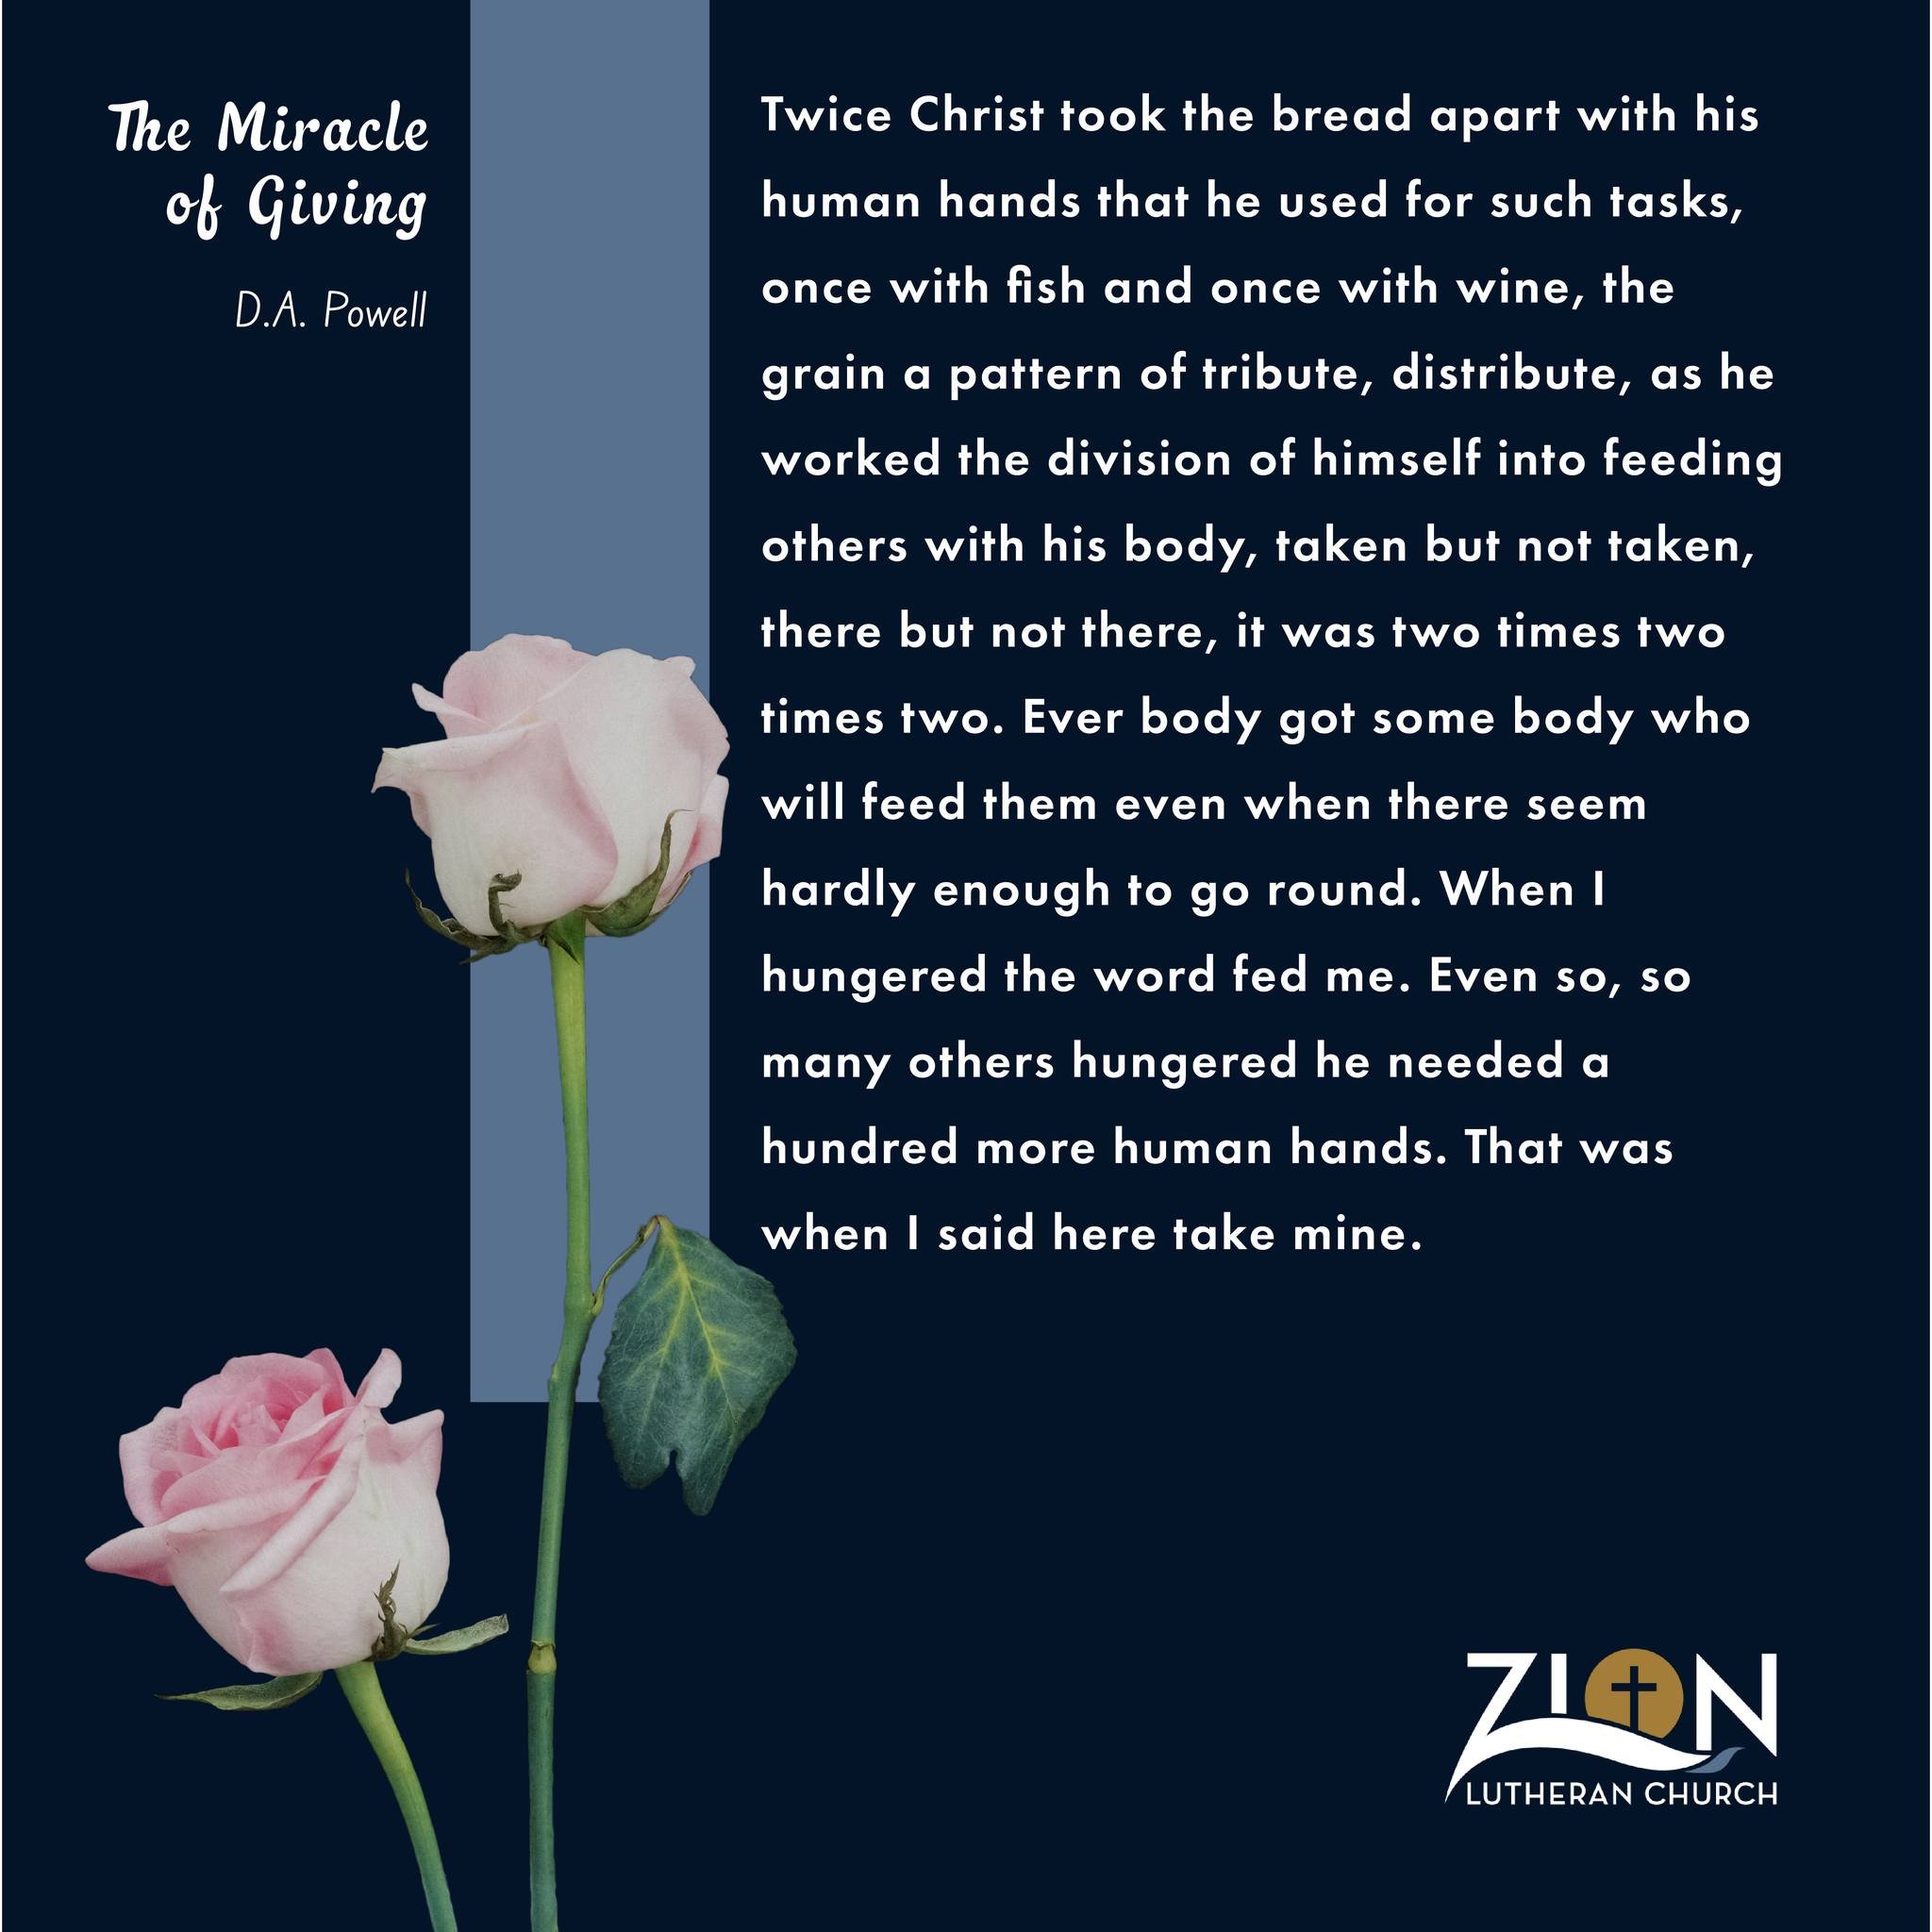 Happy National Poetry Month! Here's some beautiful words from D.A. Powell- The Miracle of Giving. Hope you have a wonderful day 💙💛

 #midwestliving #faithcommunity #iowa #iowacity #lutheranchurch #church #churchcommunity #universityofiowa #HawkeyeN